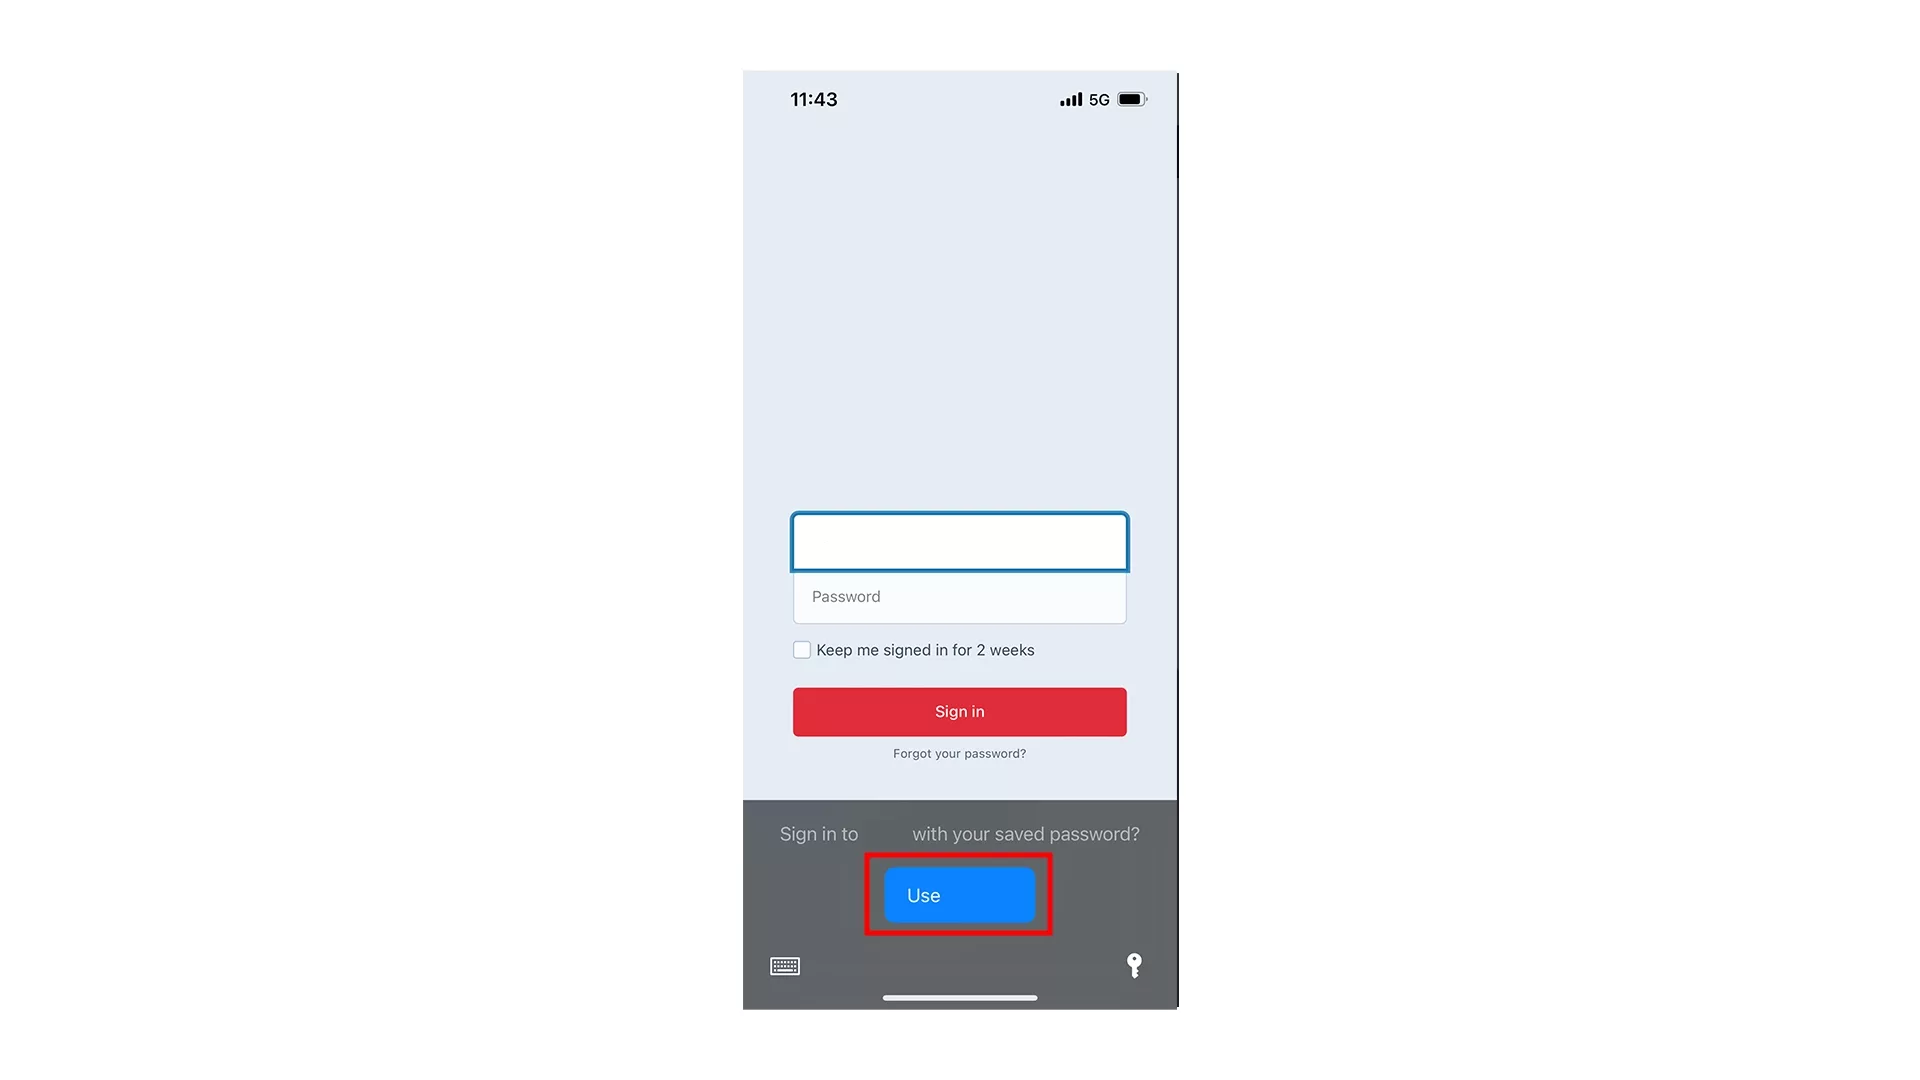 A screenshot of an iPhone showing you the modal that appears when you press a username or password on a website. A blue button allows you to login with the saved user name or password from the Apple Password Manager.